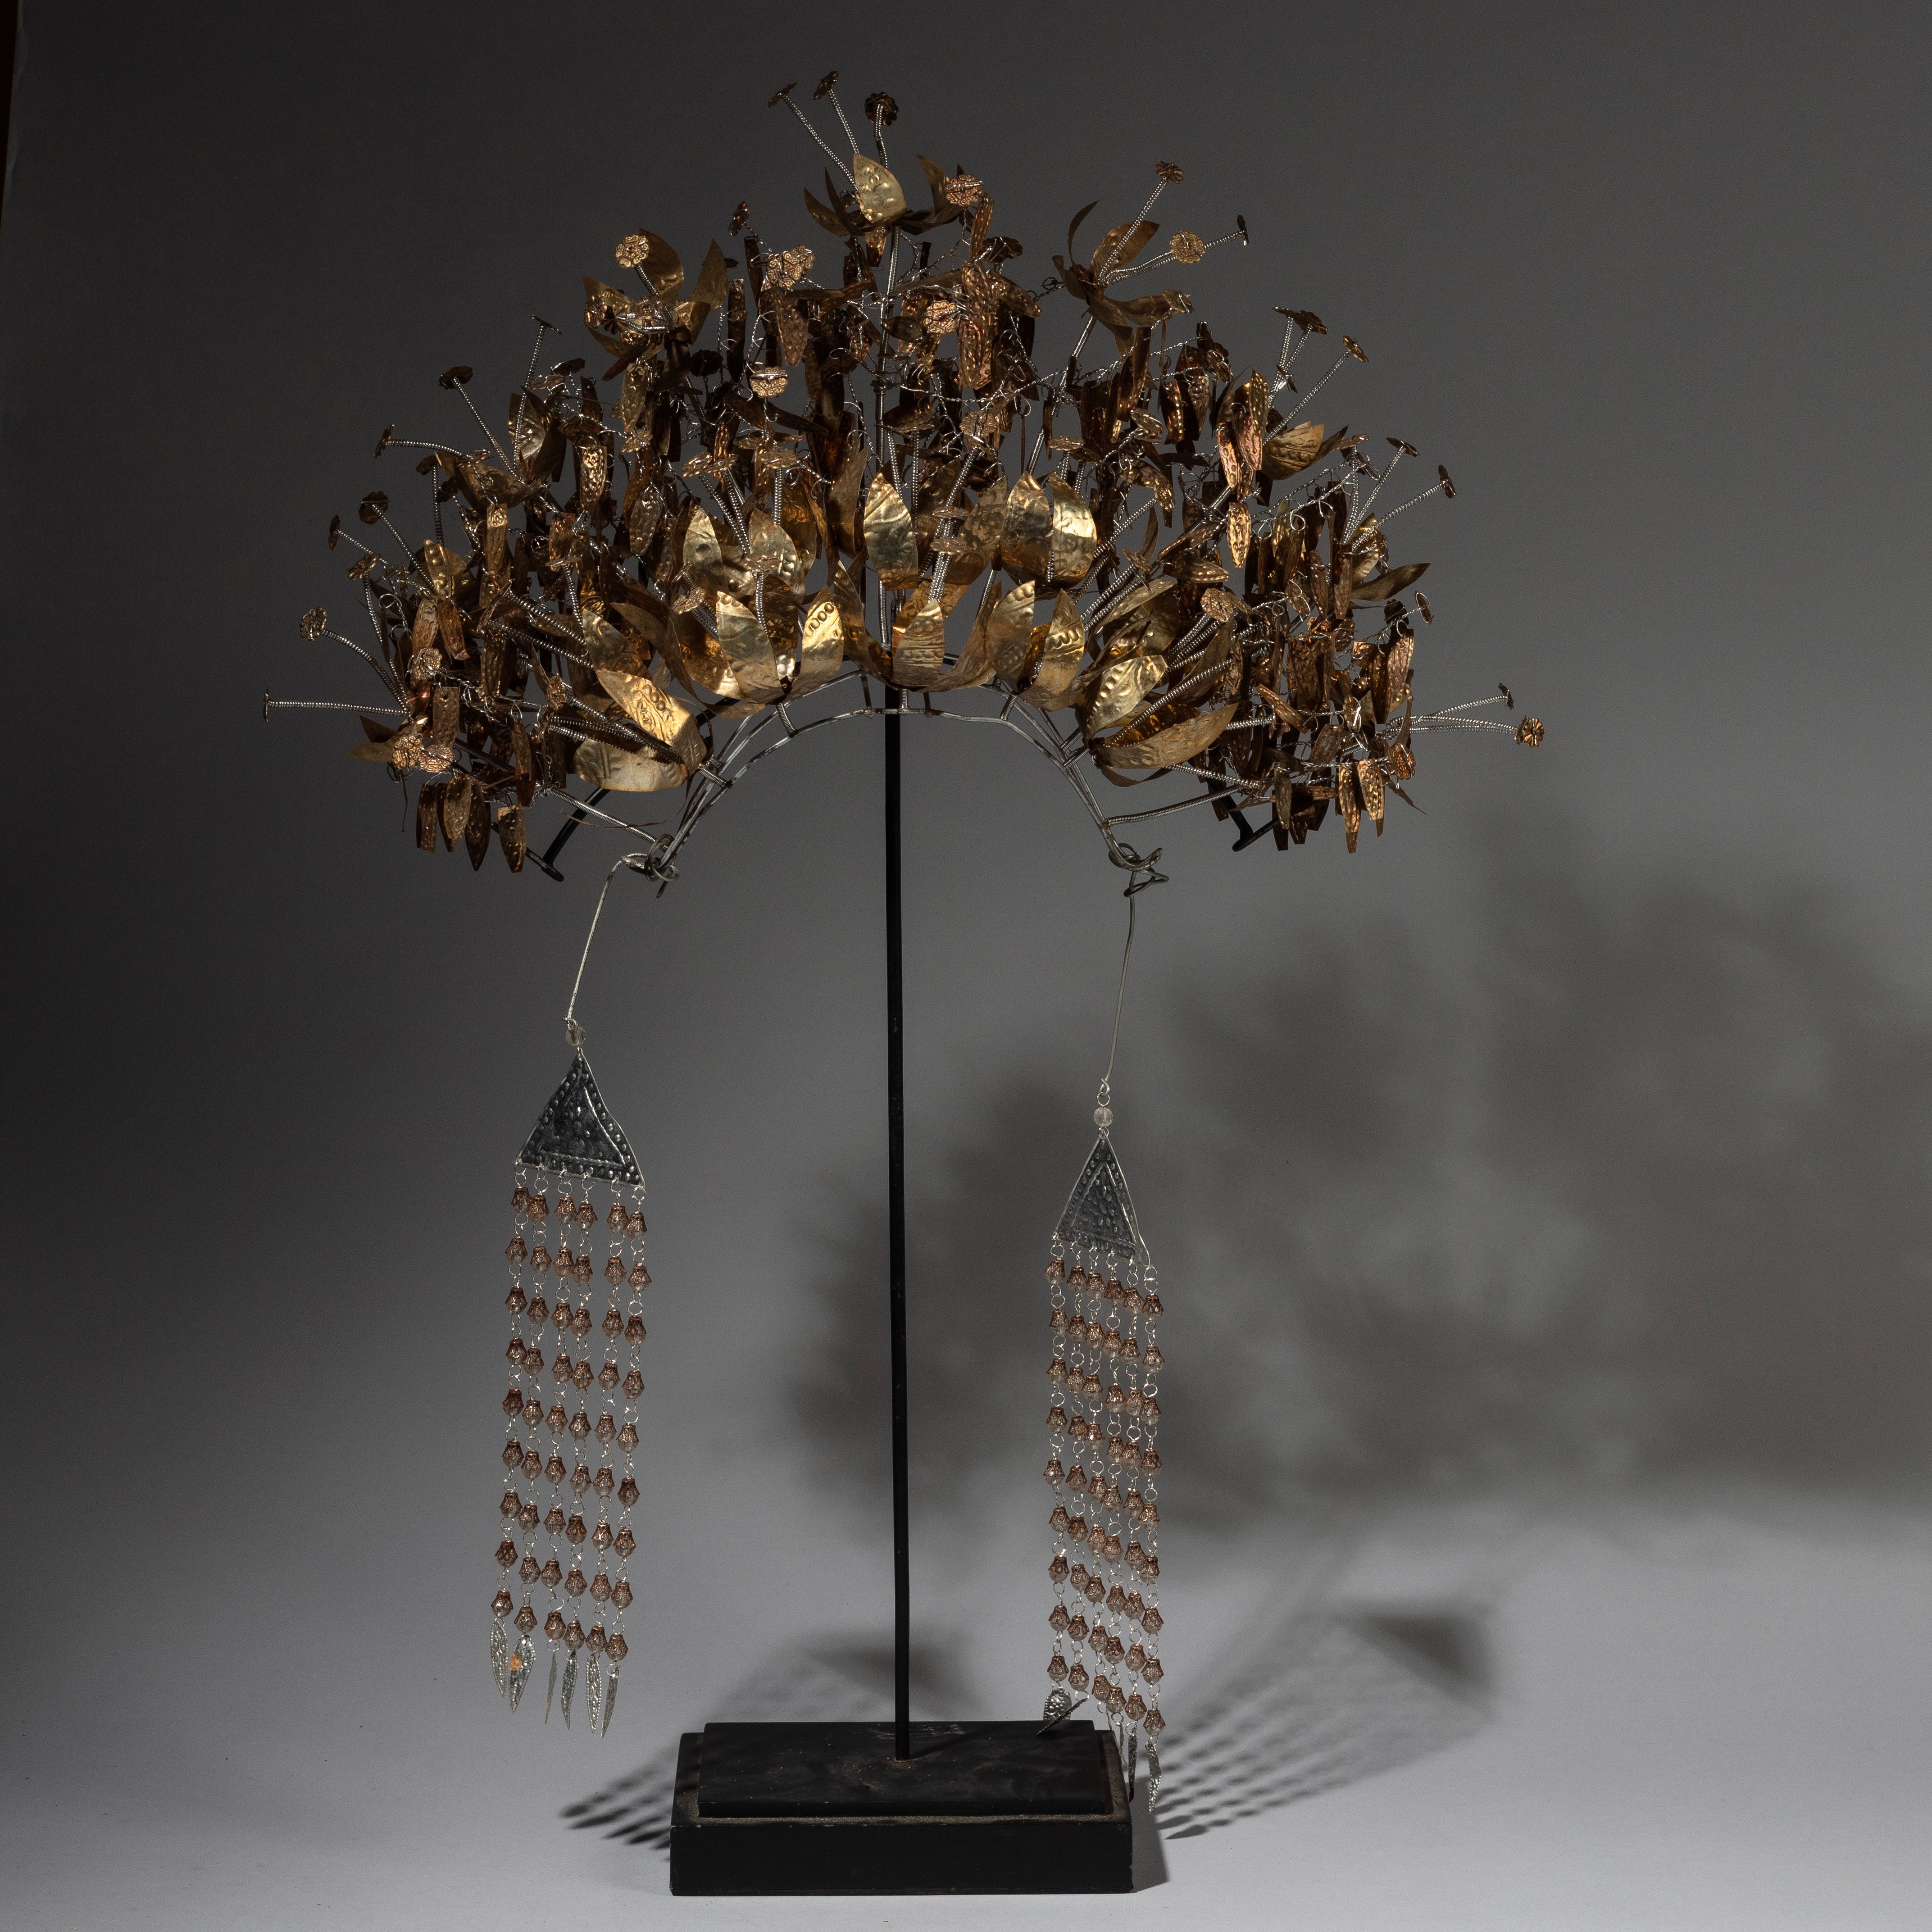 A SPACIAL WEDDING GOLD 'CROWN' HEADDRESS FROM BALI INDONESIA( No 1914)